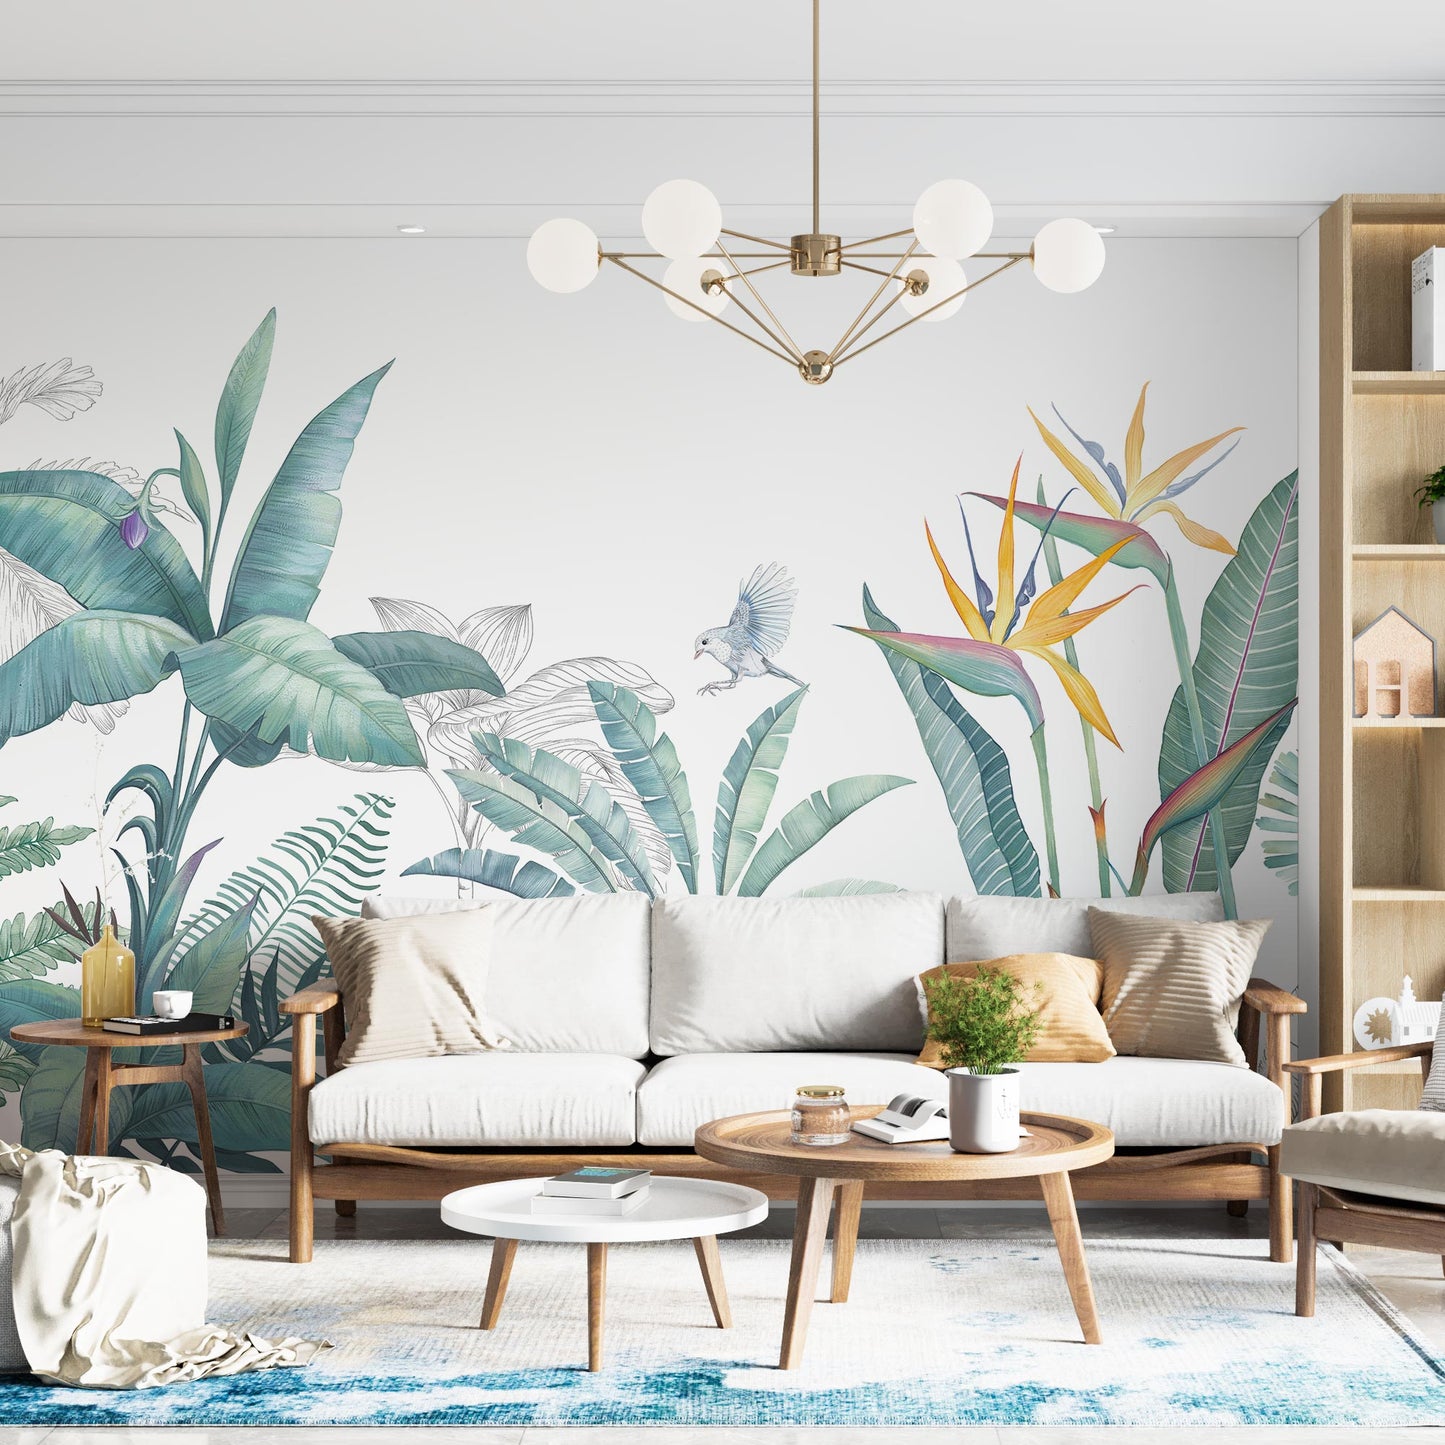 Spacious and inviting living room with white couch, wooden furniture, and a statemnt wall with botanical wallpaper mural